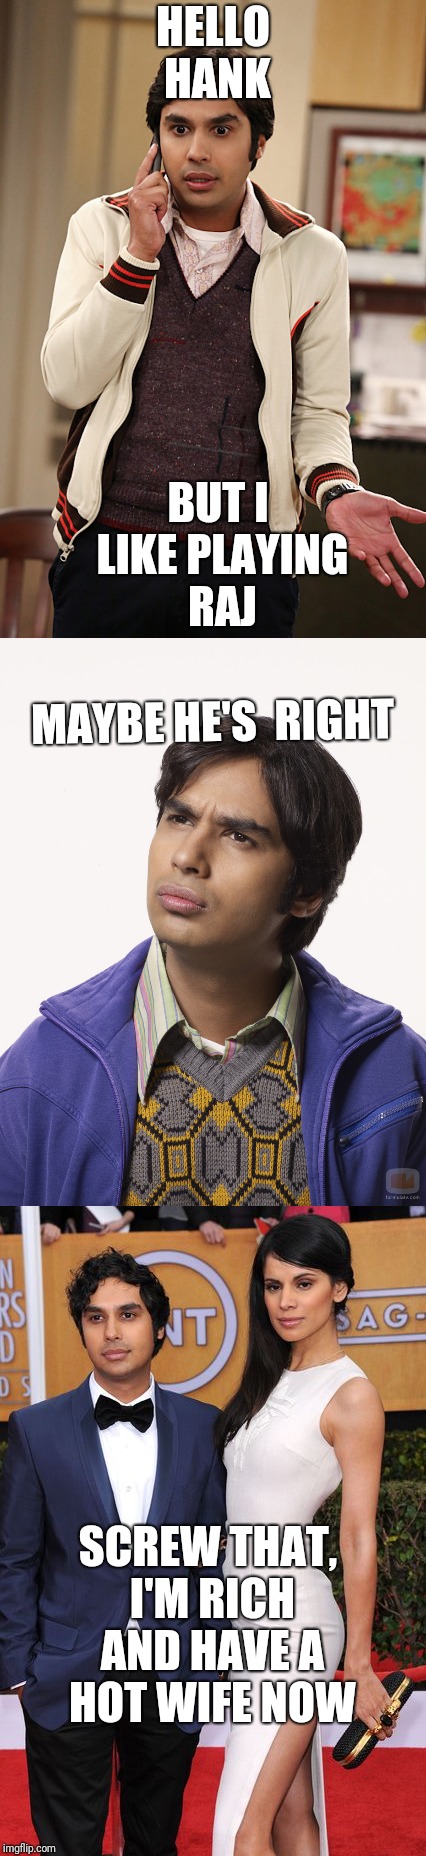 HELLO HANK; BUT I LIKE PLAYING RAJ; MAYBE HE'S  RIGHT; SCREW THAT, I'M RICH AND HAVE A HOT WIFE NOW | image tagged in big bang theory | made w/ Imgflip meme maker